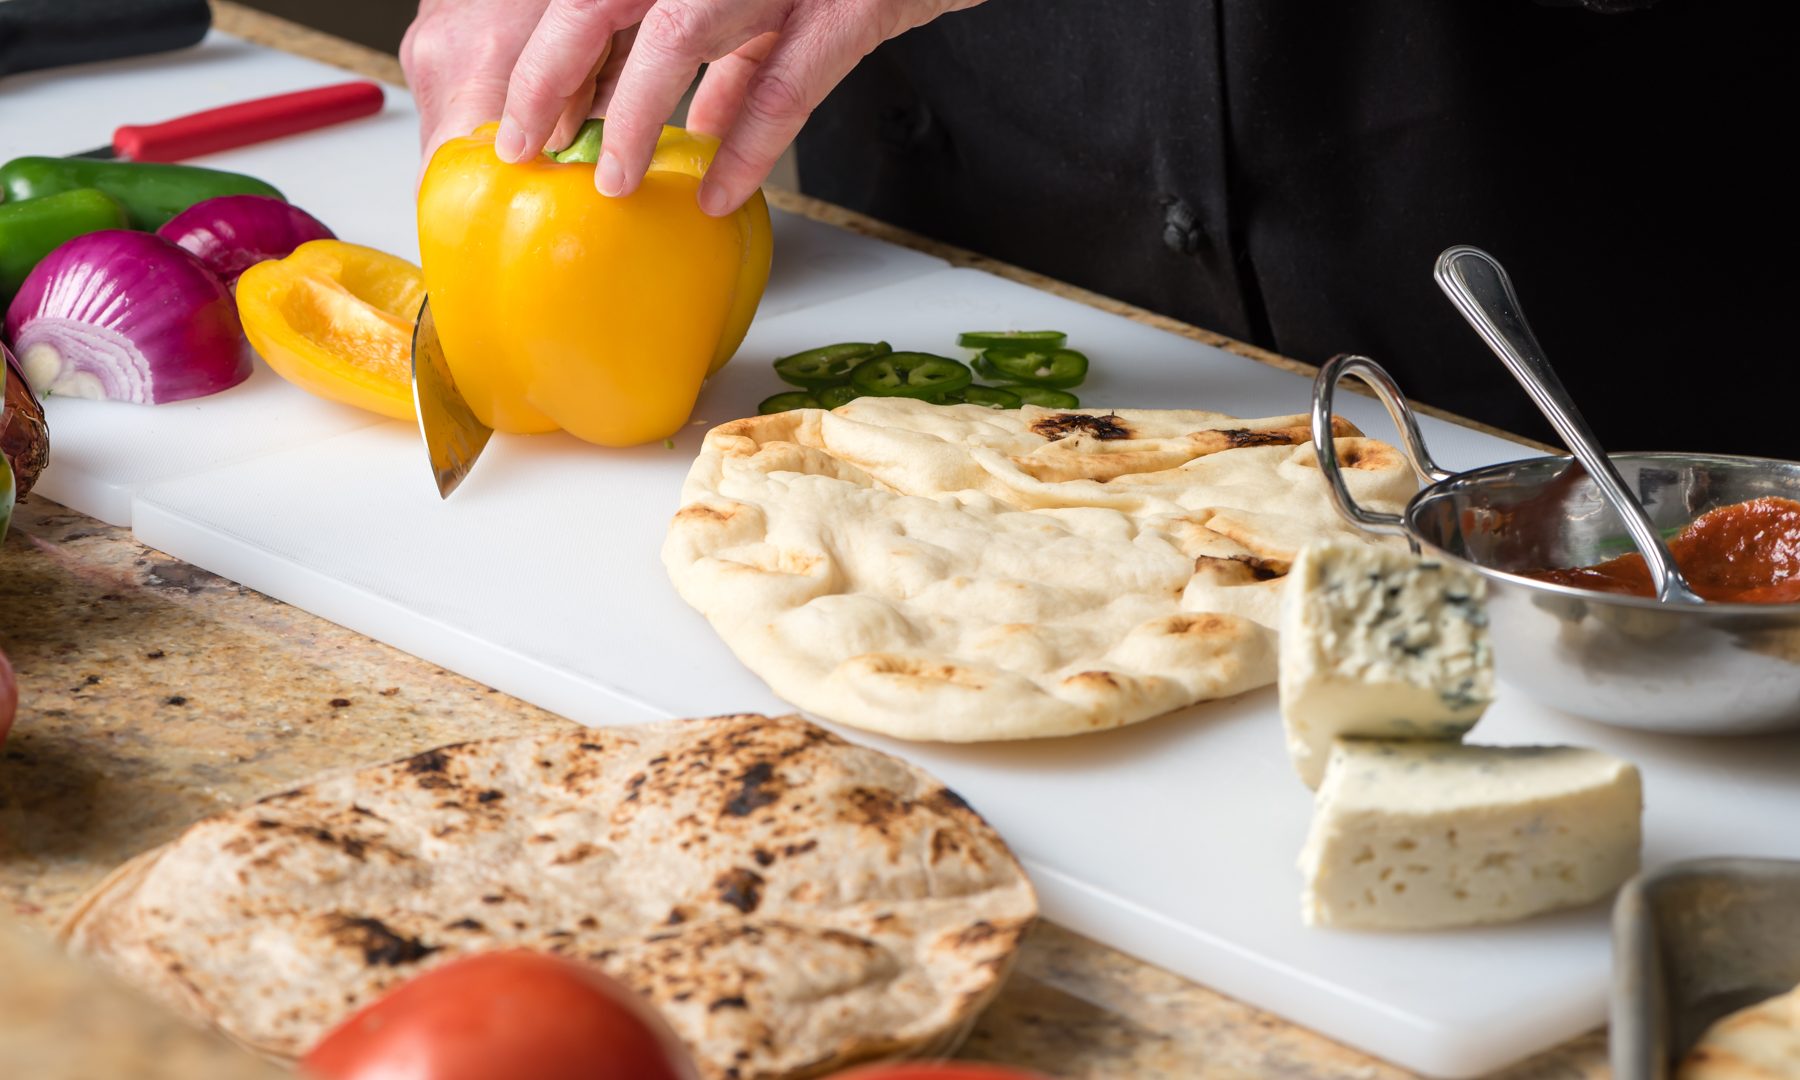 Chef preparing a meal by slicing a pepper. Stonefire Original Naan is on the cutting board with vegetables, cheese and sauces nearby in restaurant preparation style.